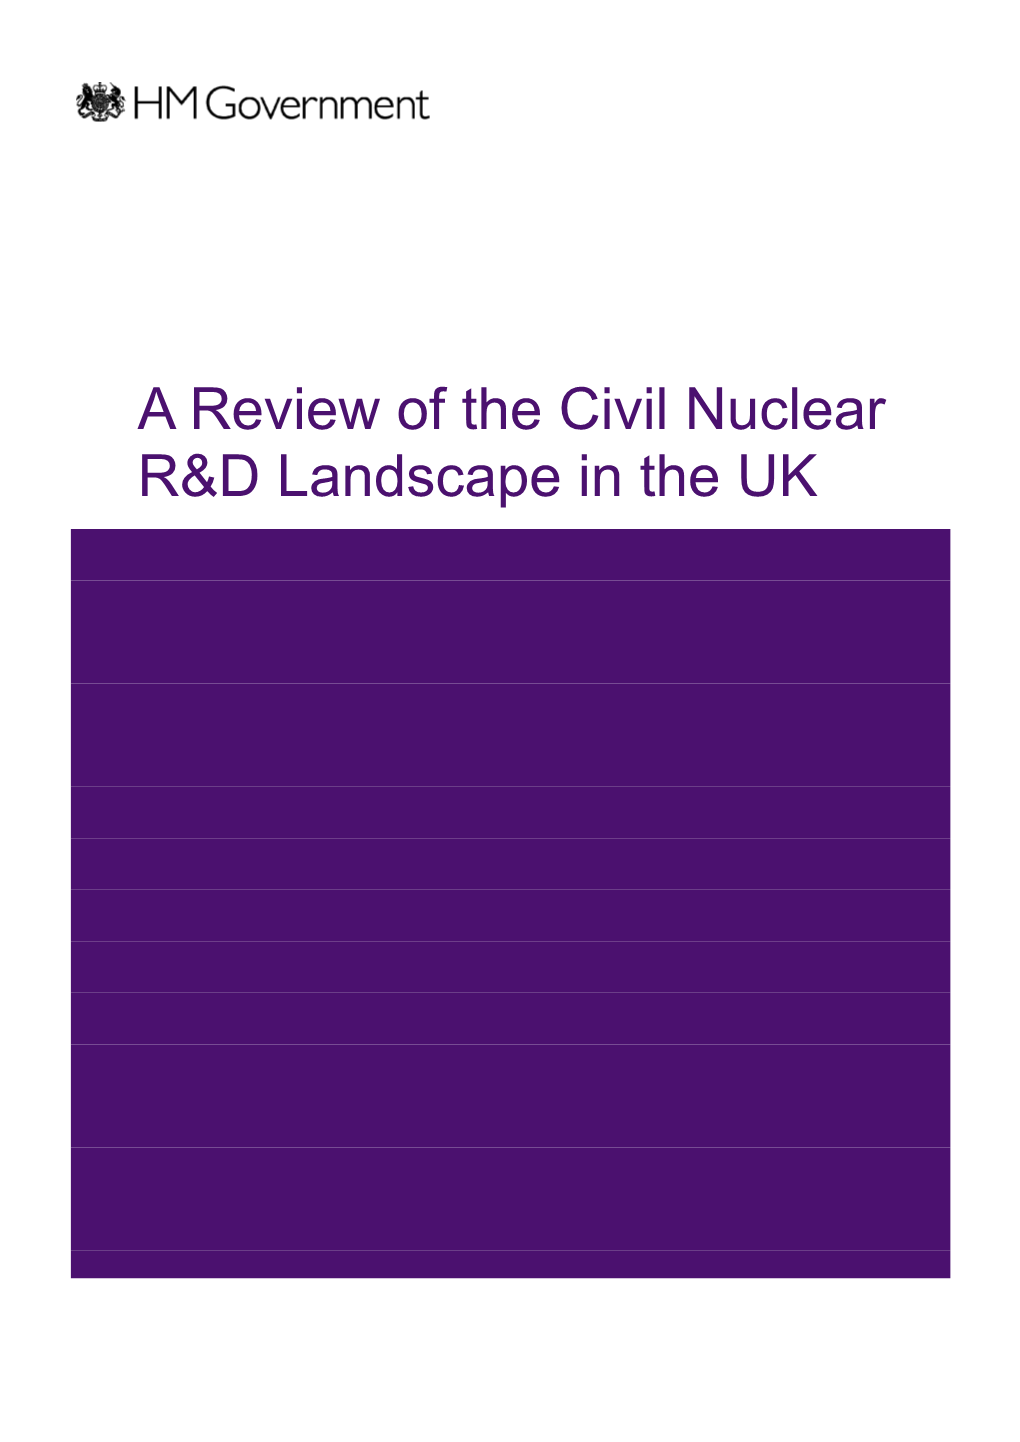 A Review of the Civil Nuclear R&D Landscape in the UK